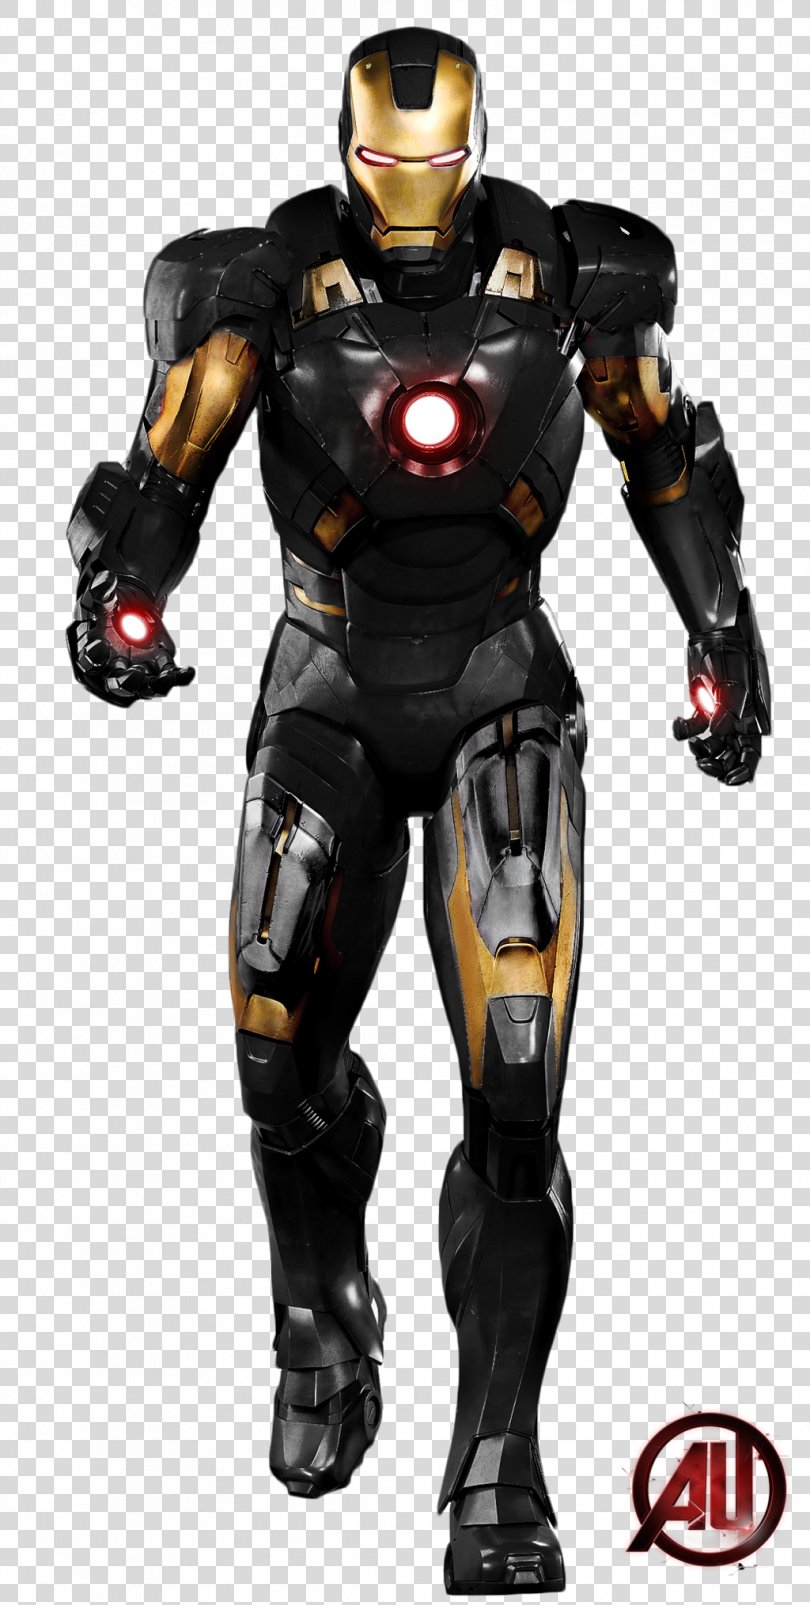 Iron Man Marvel Cinematic Universe Captain America, Ultron PNG